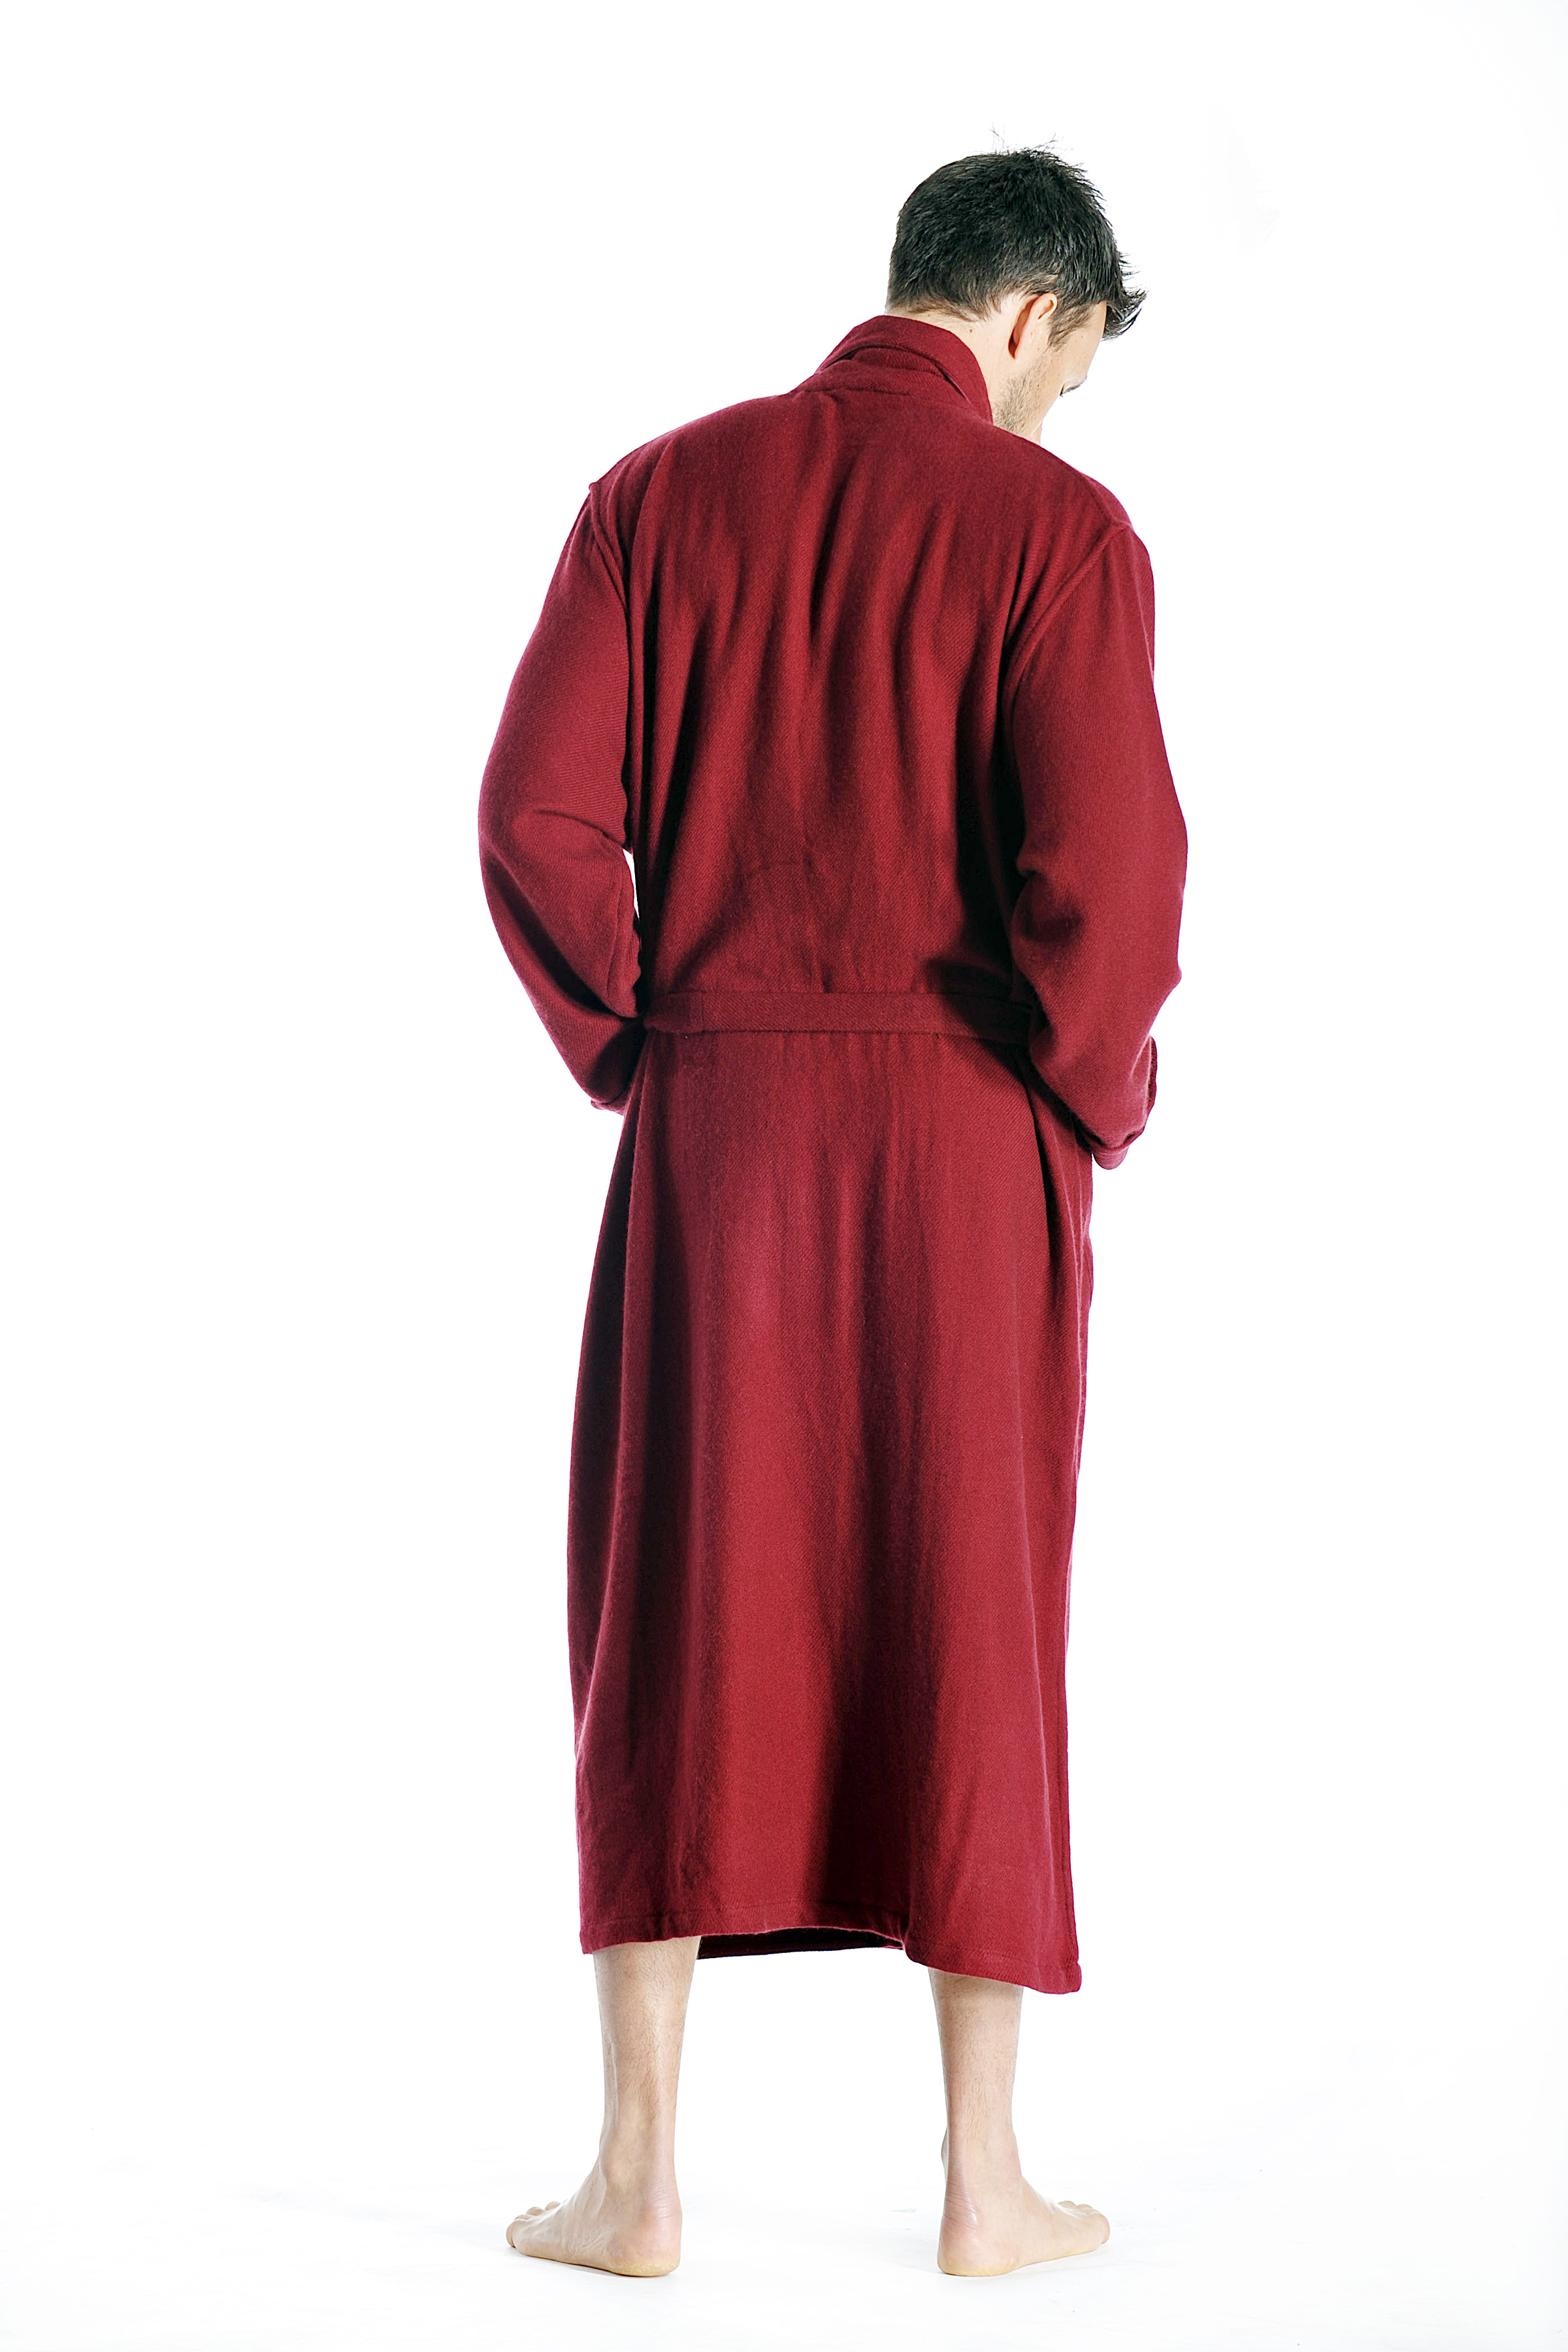 Pure Cashmere Full Length Robe for Men (Charcoal, Large/Extra Large)